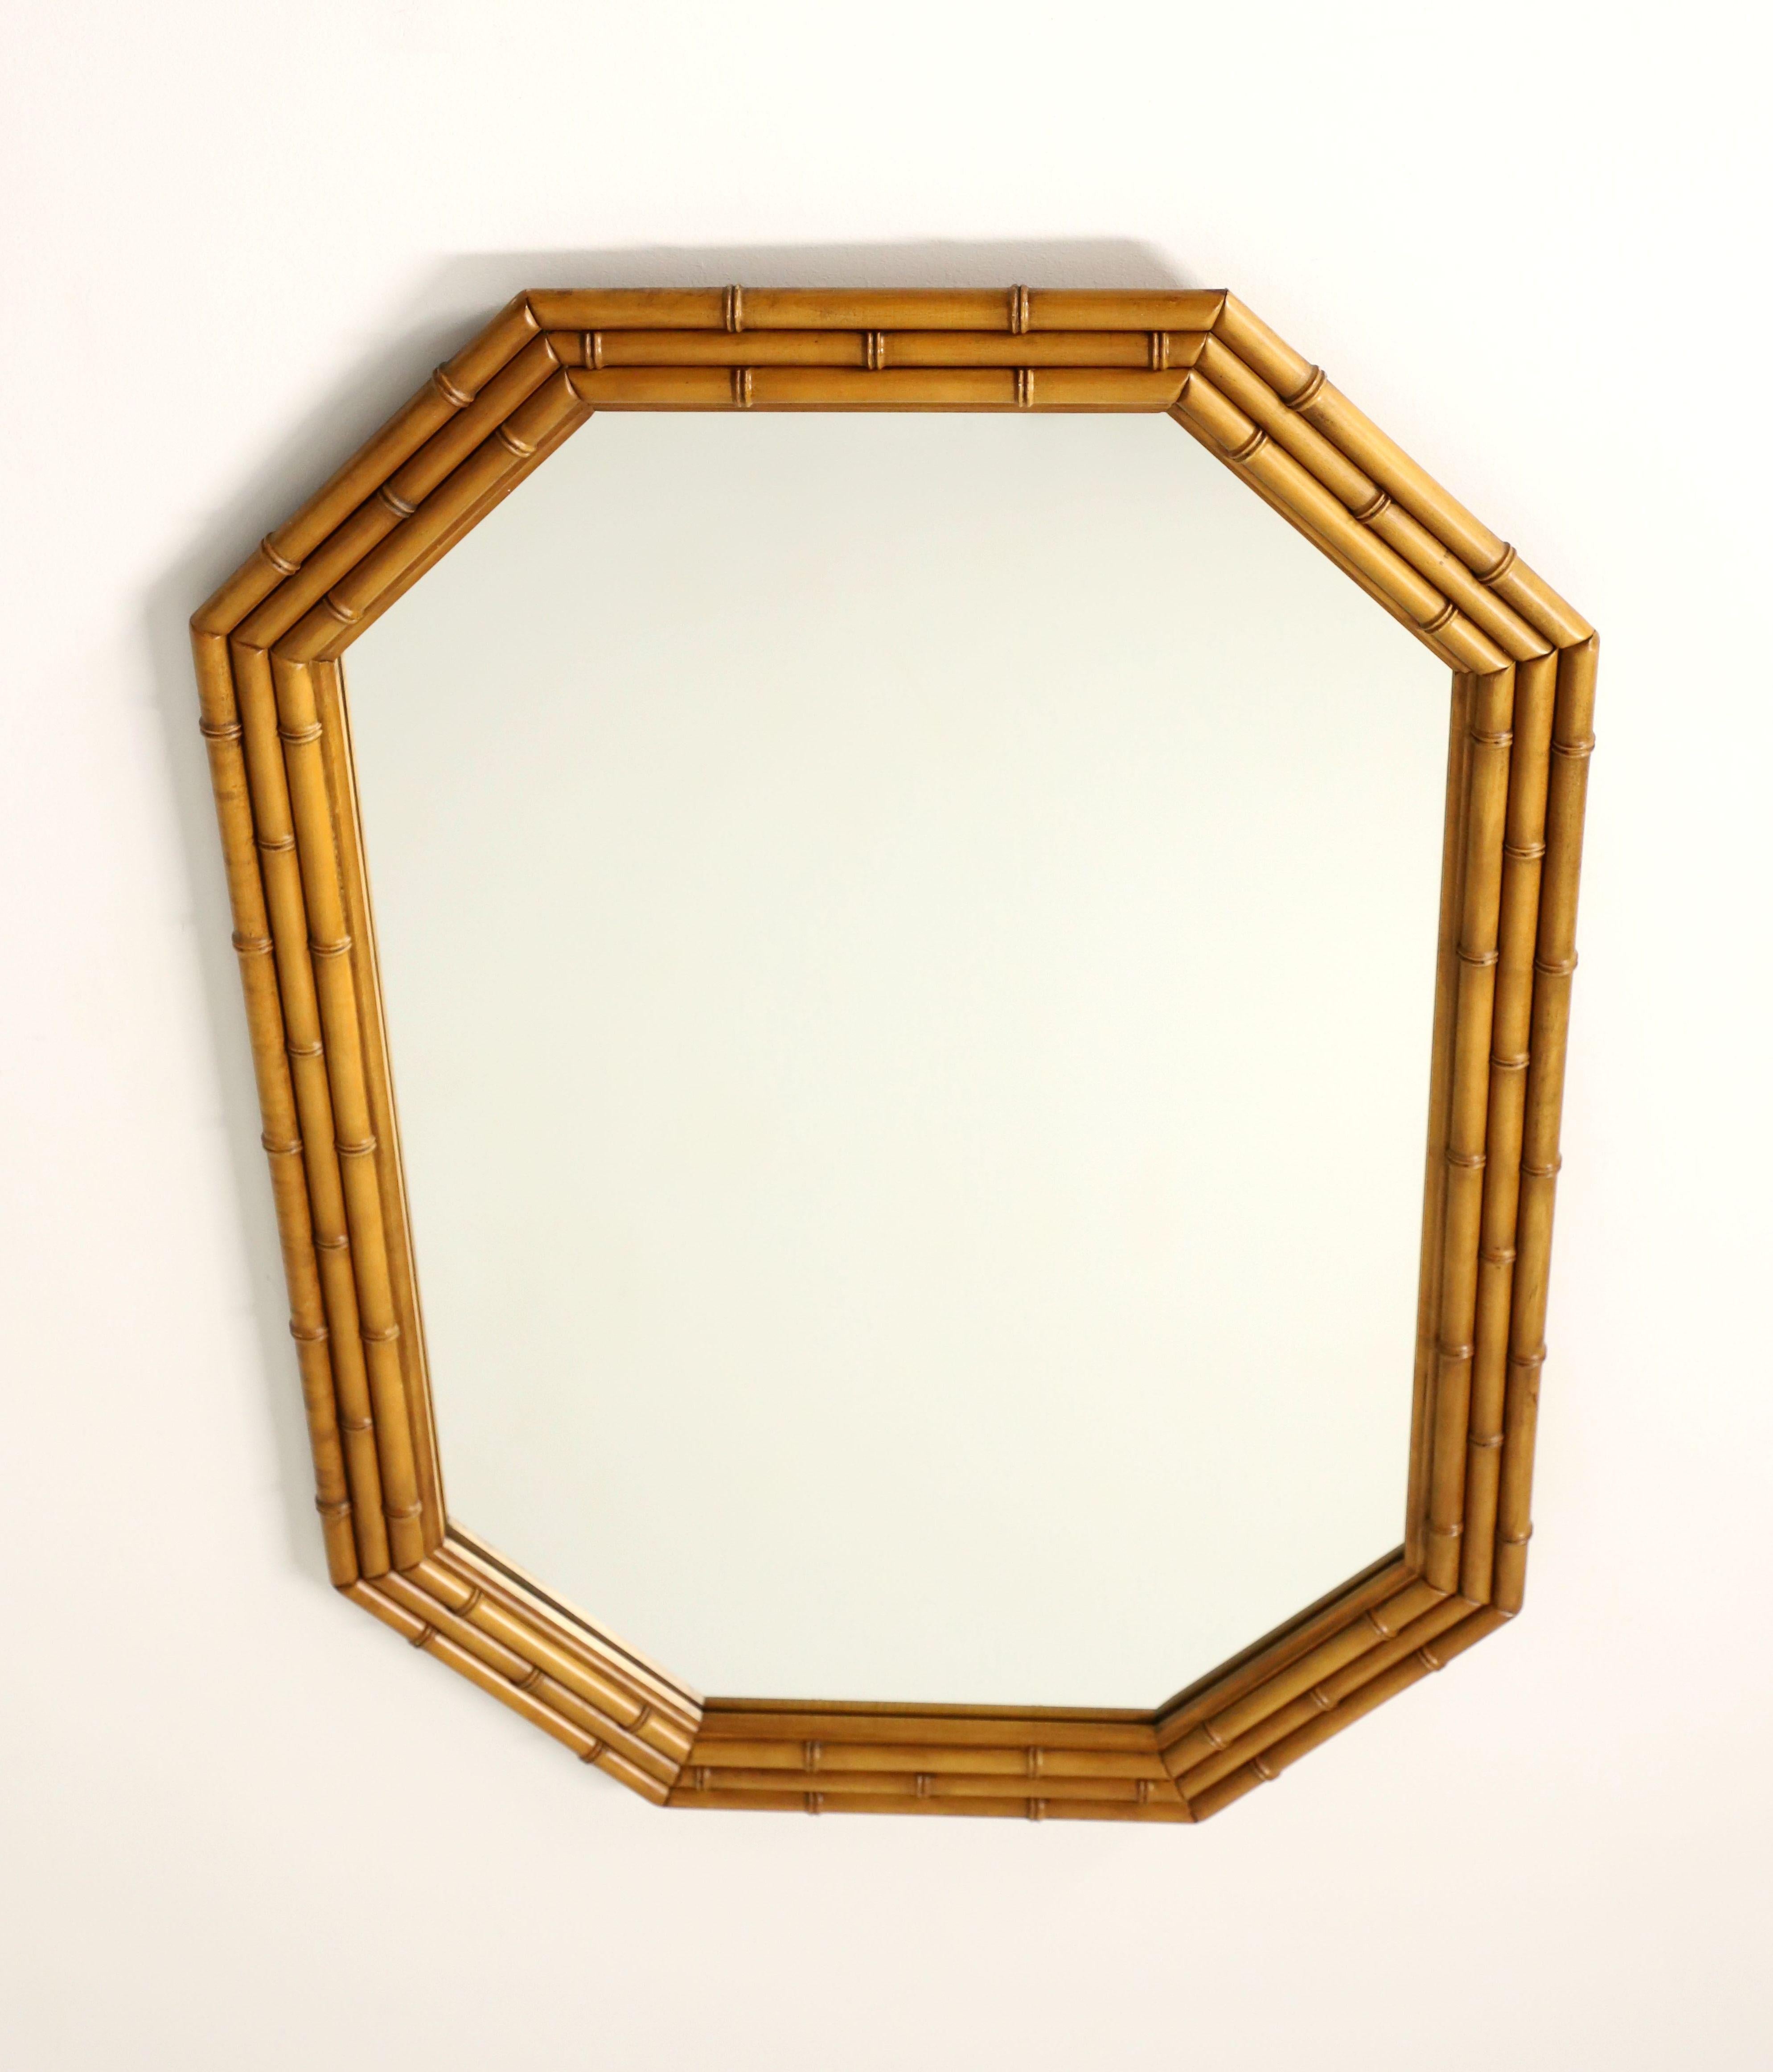 An Asian style wall mirror by Lenoir Mirror for Thomasville. Mirrored glass in a light brown wood tone faux bamboo frame. Features an octagonal shape with faux bamboo detail to the frame. Made in Lenoir, North Carolina, USA, in the late 20th